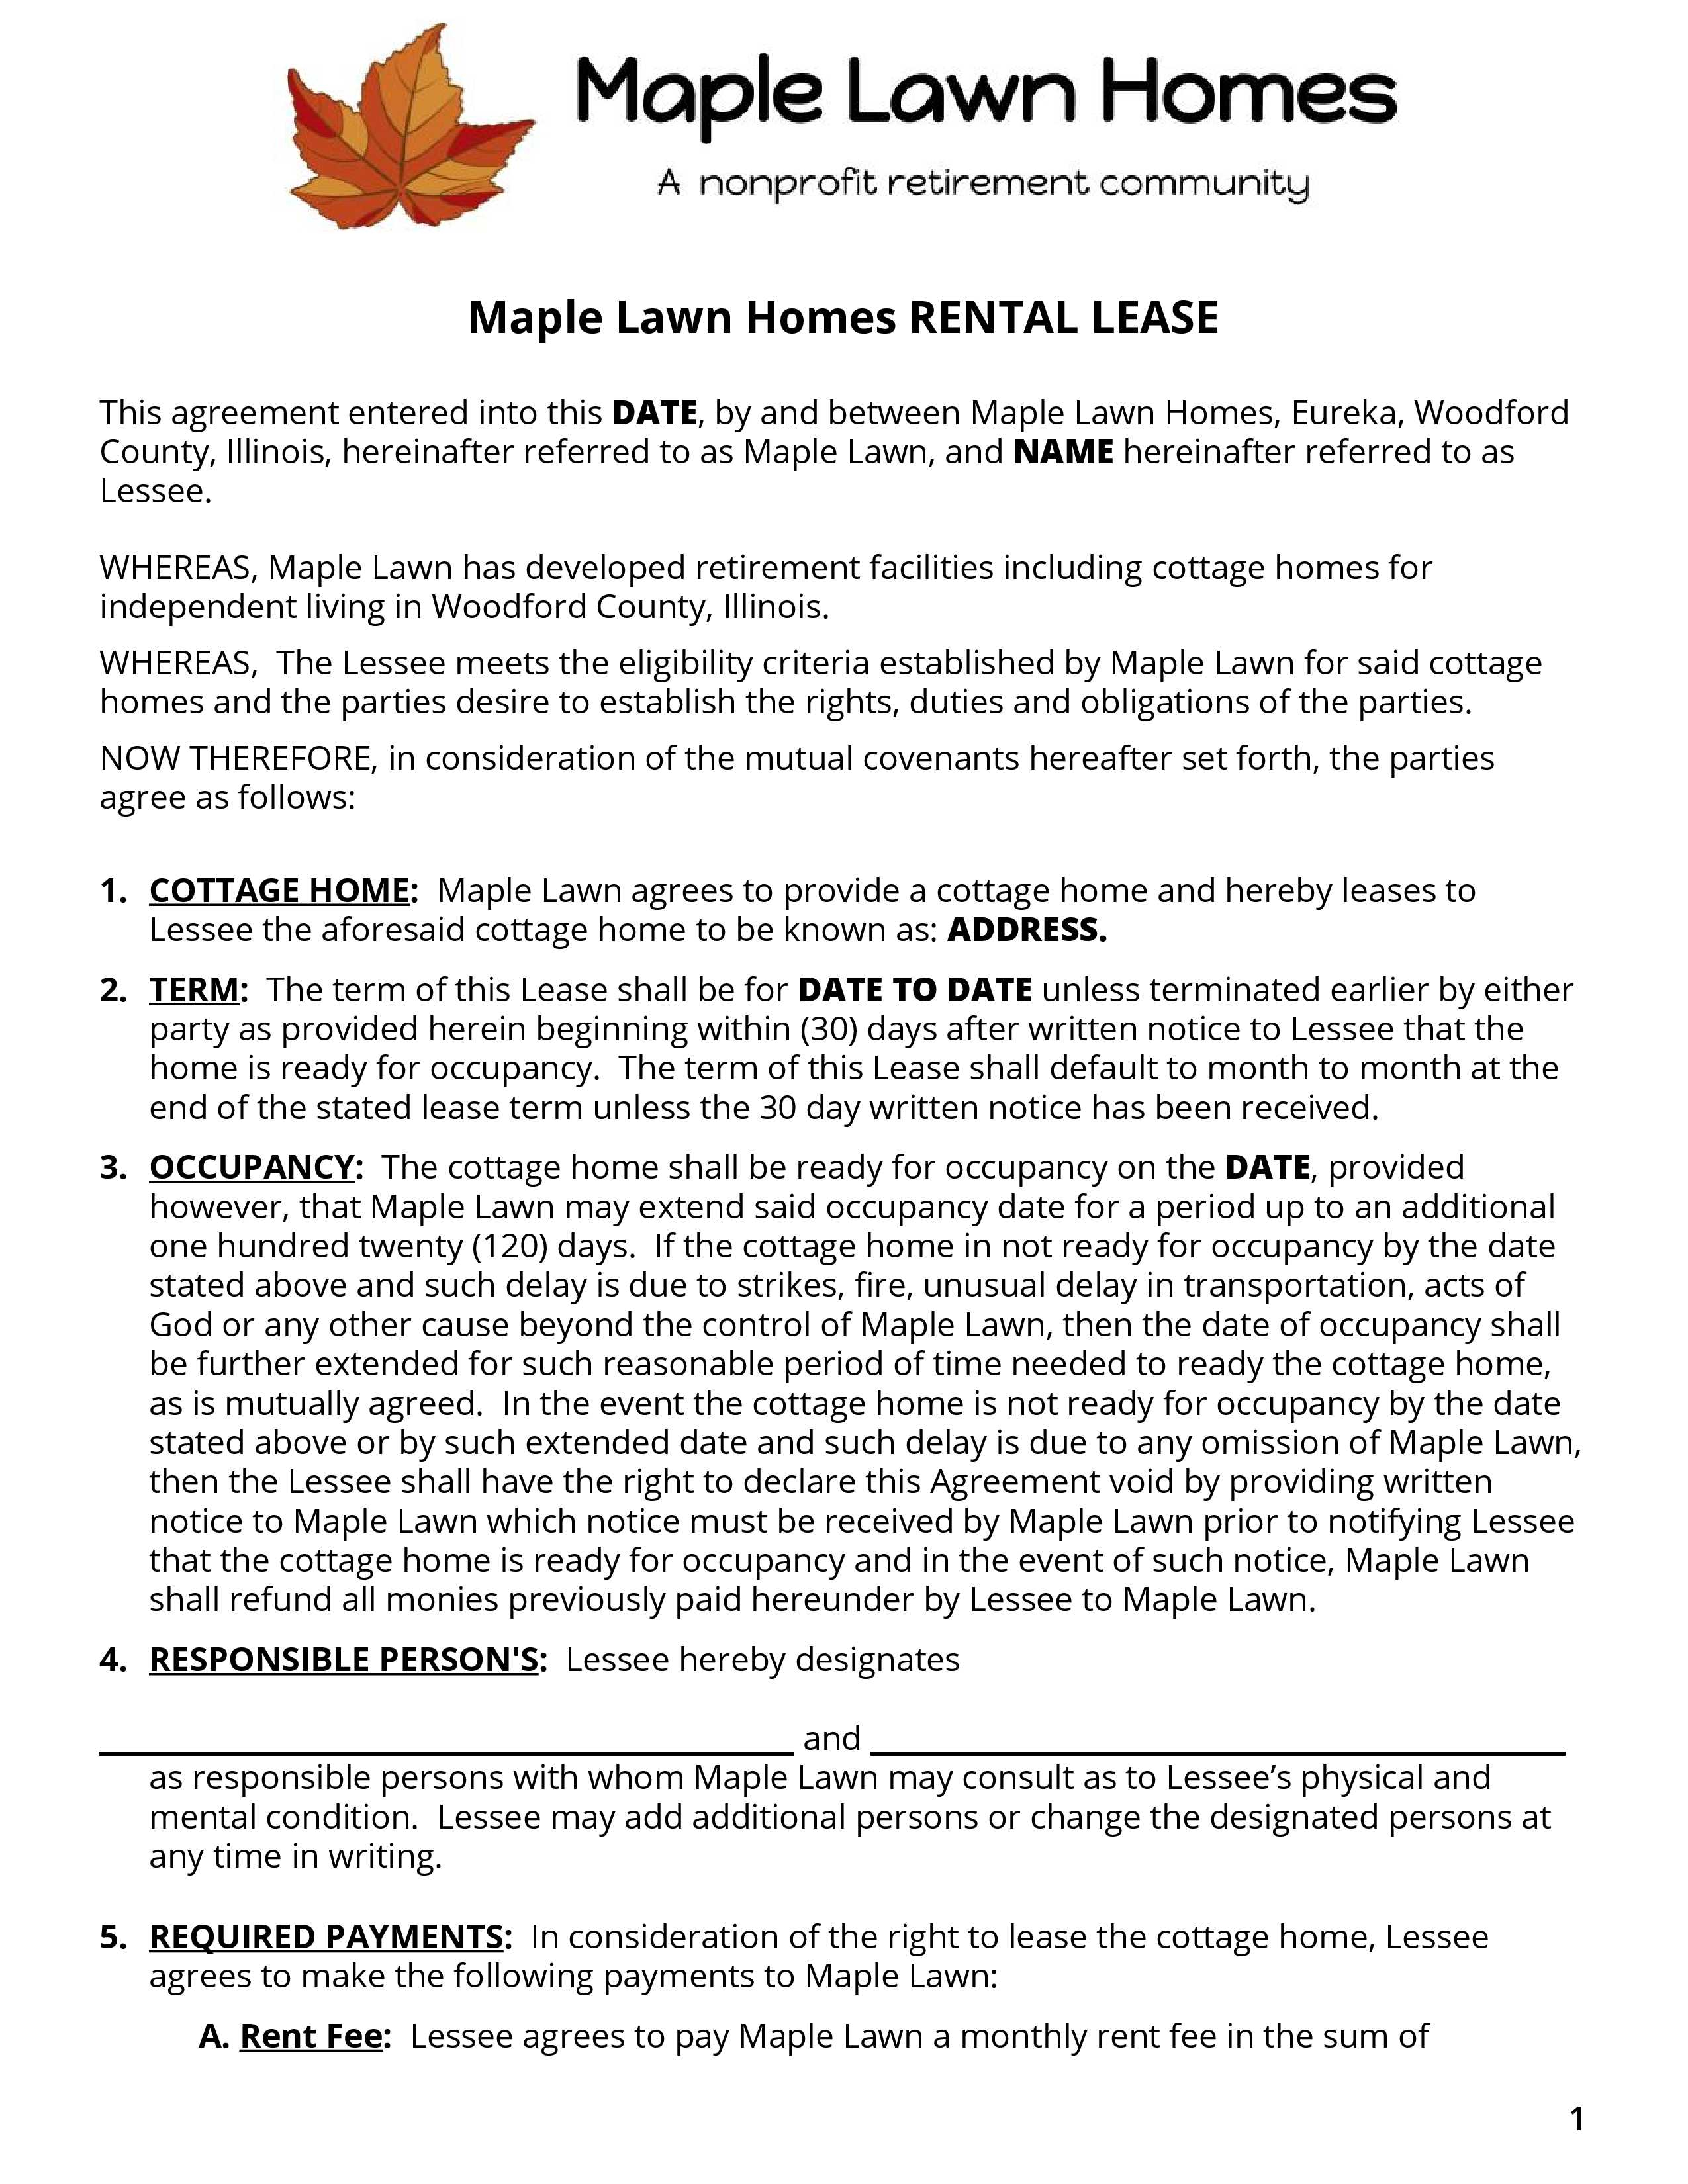 Examples Of Lease Agreements Maple Lawn Homes Rental Lease Example